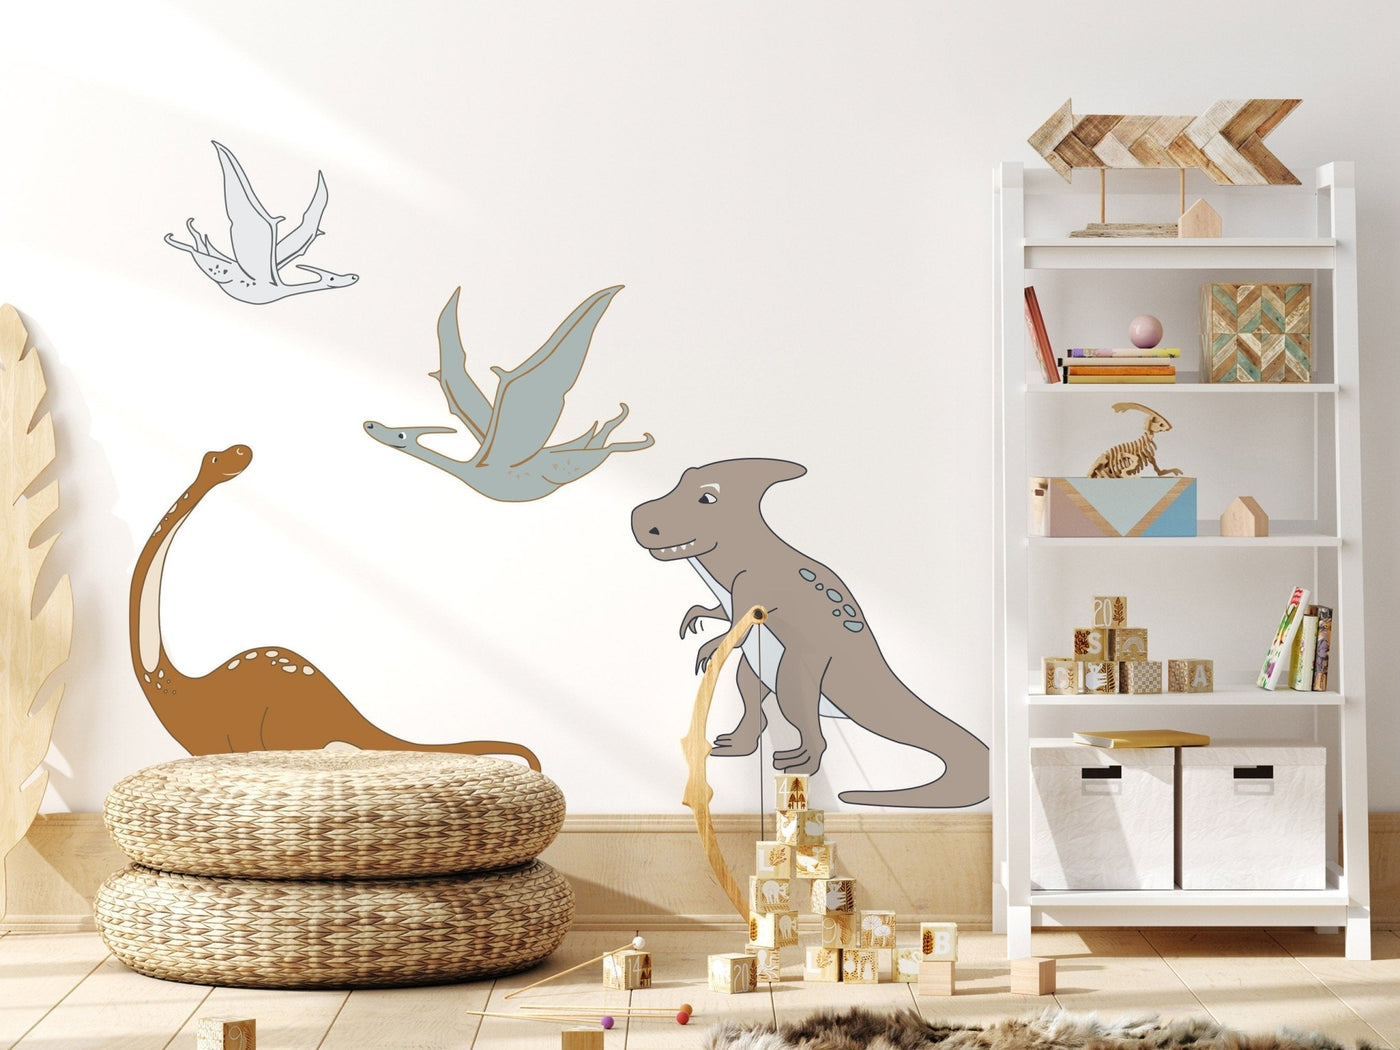 Dinosaur Wall Decals - Jack Harry and Ollie